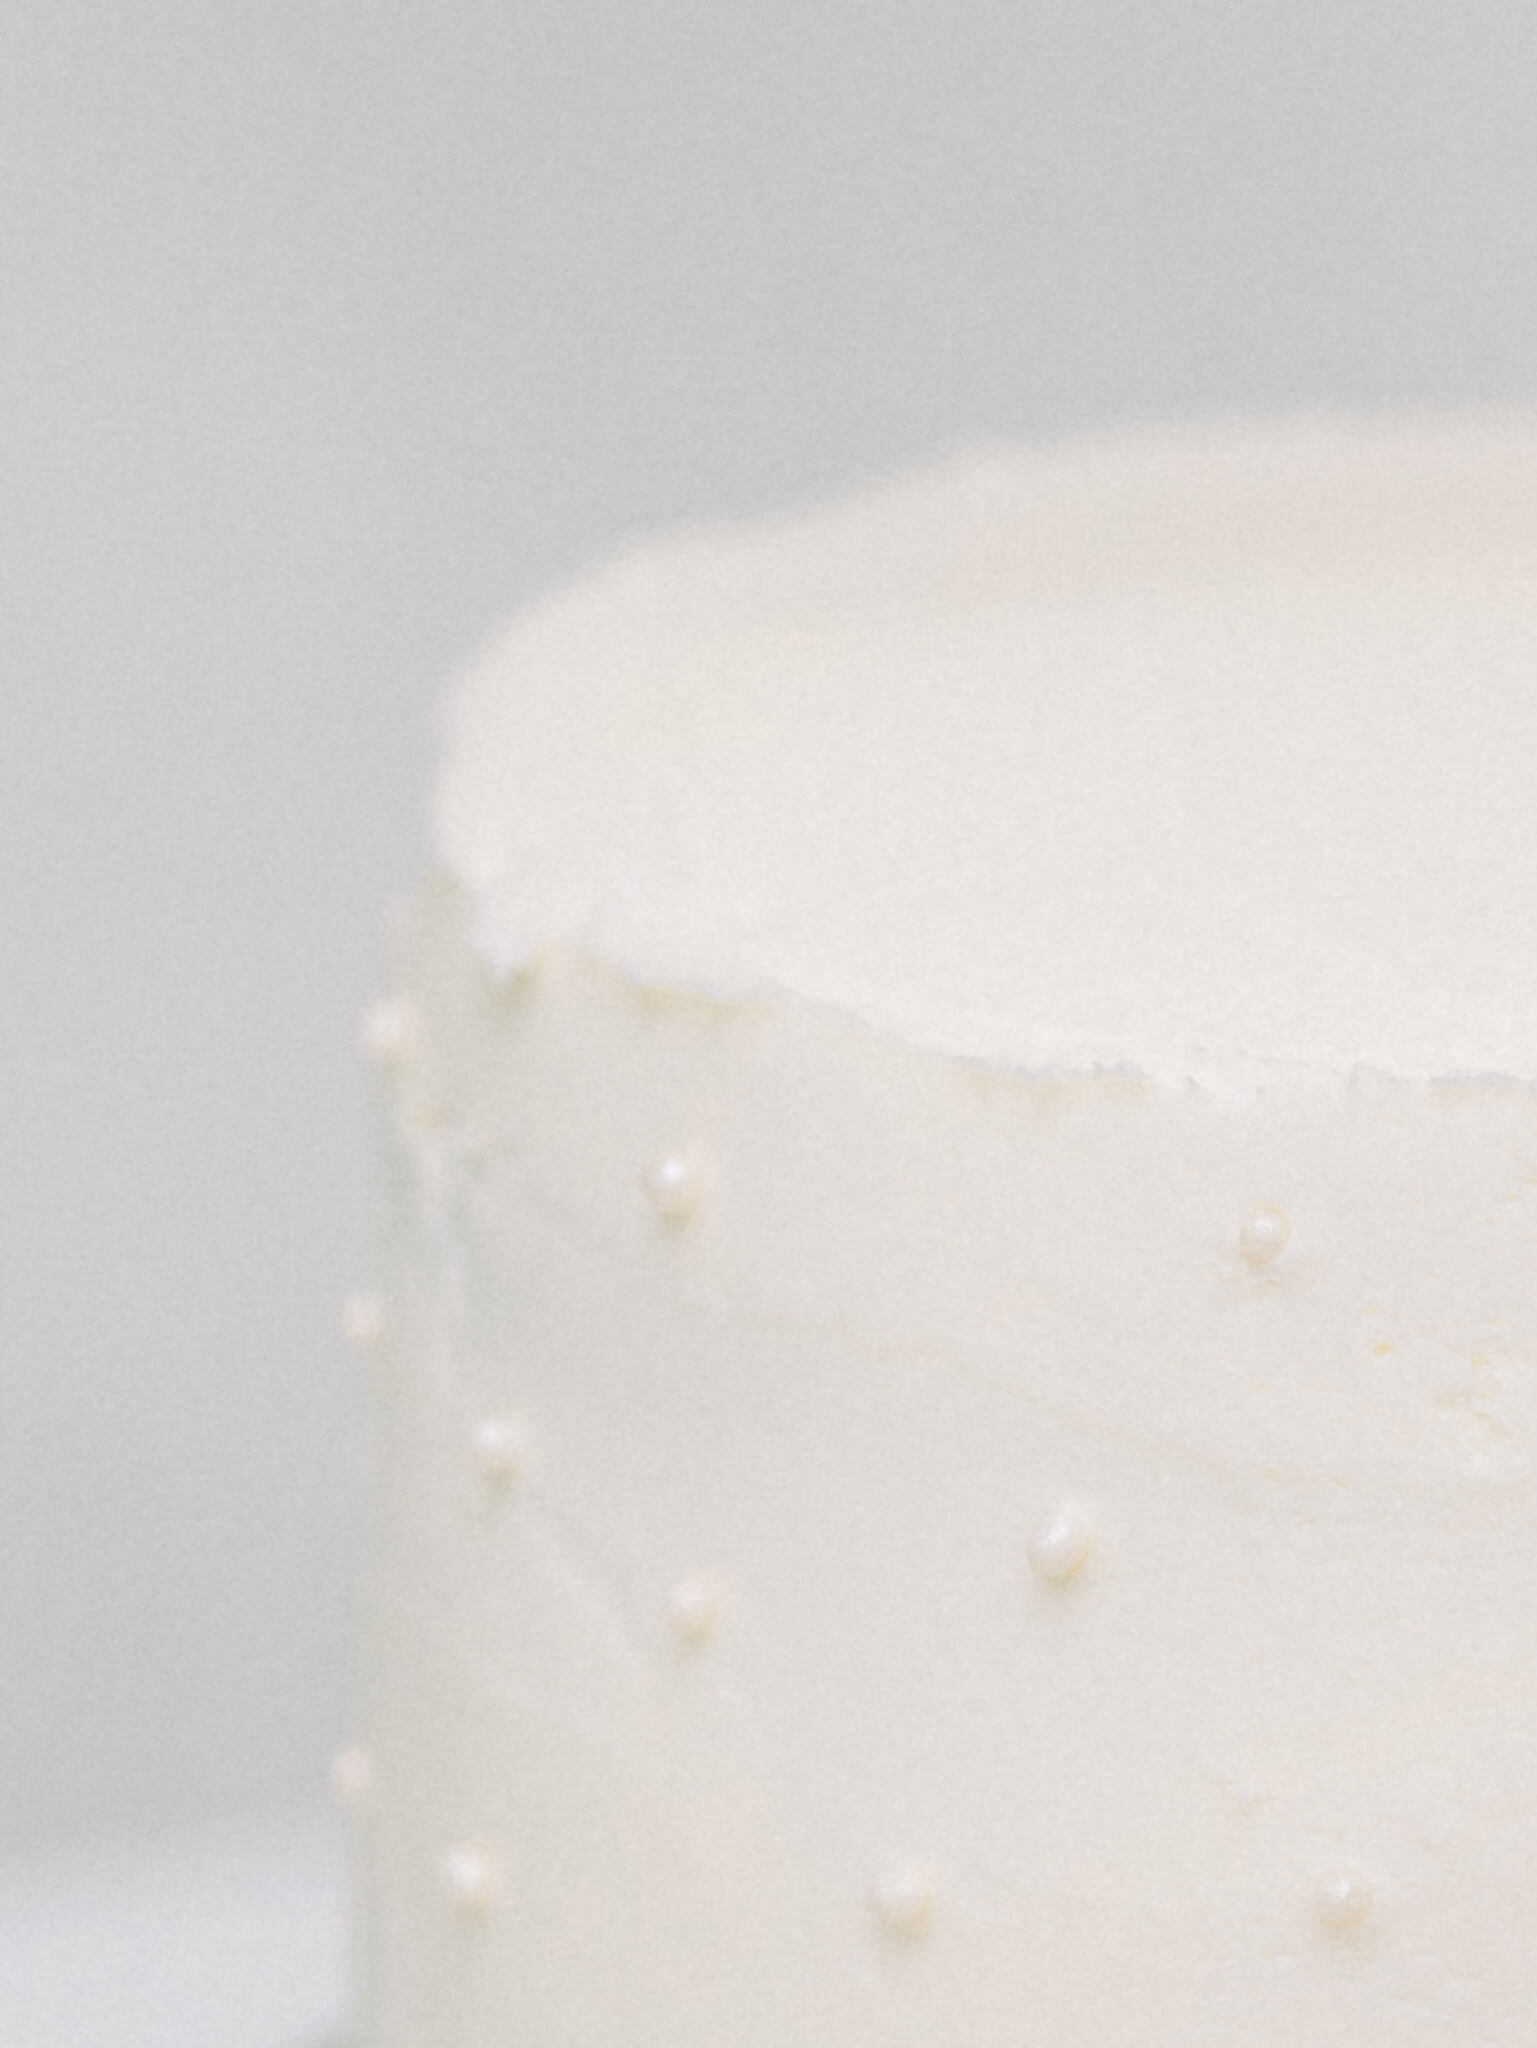 Close-up of a white cake with white pearls.